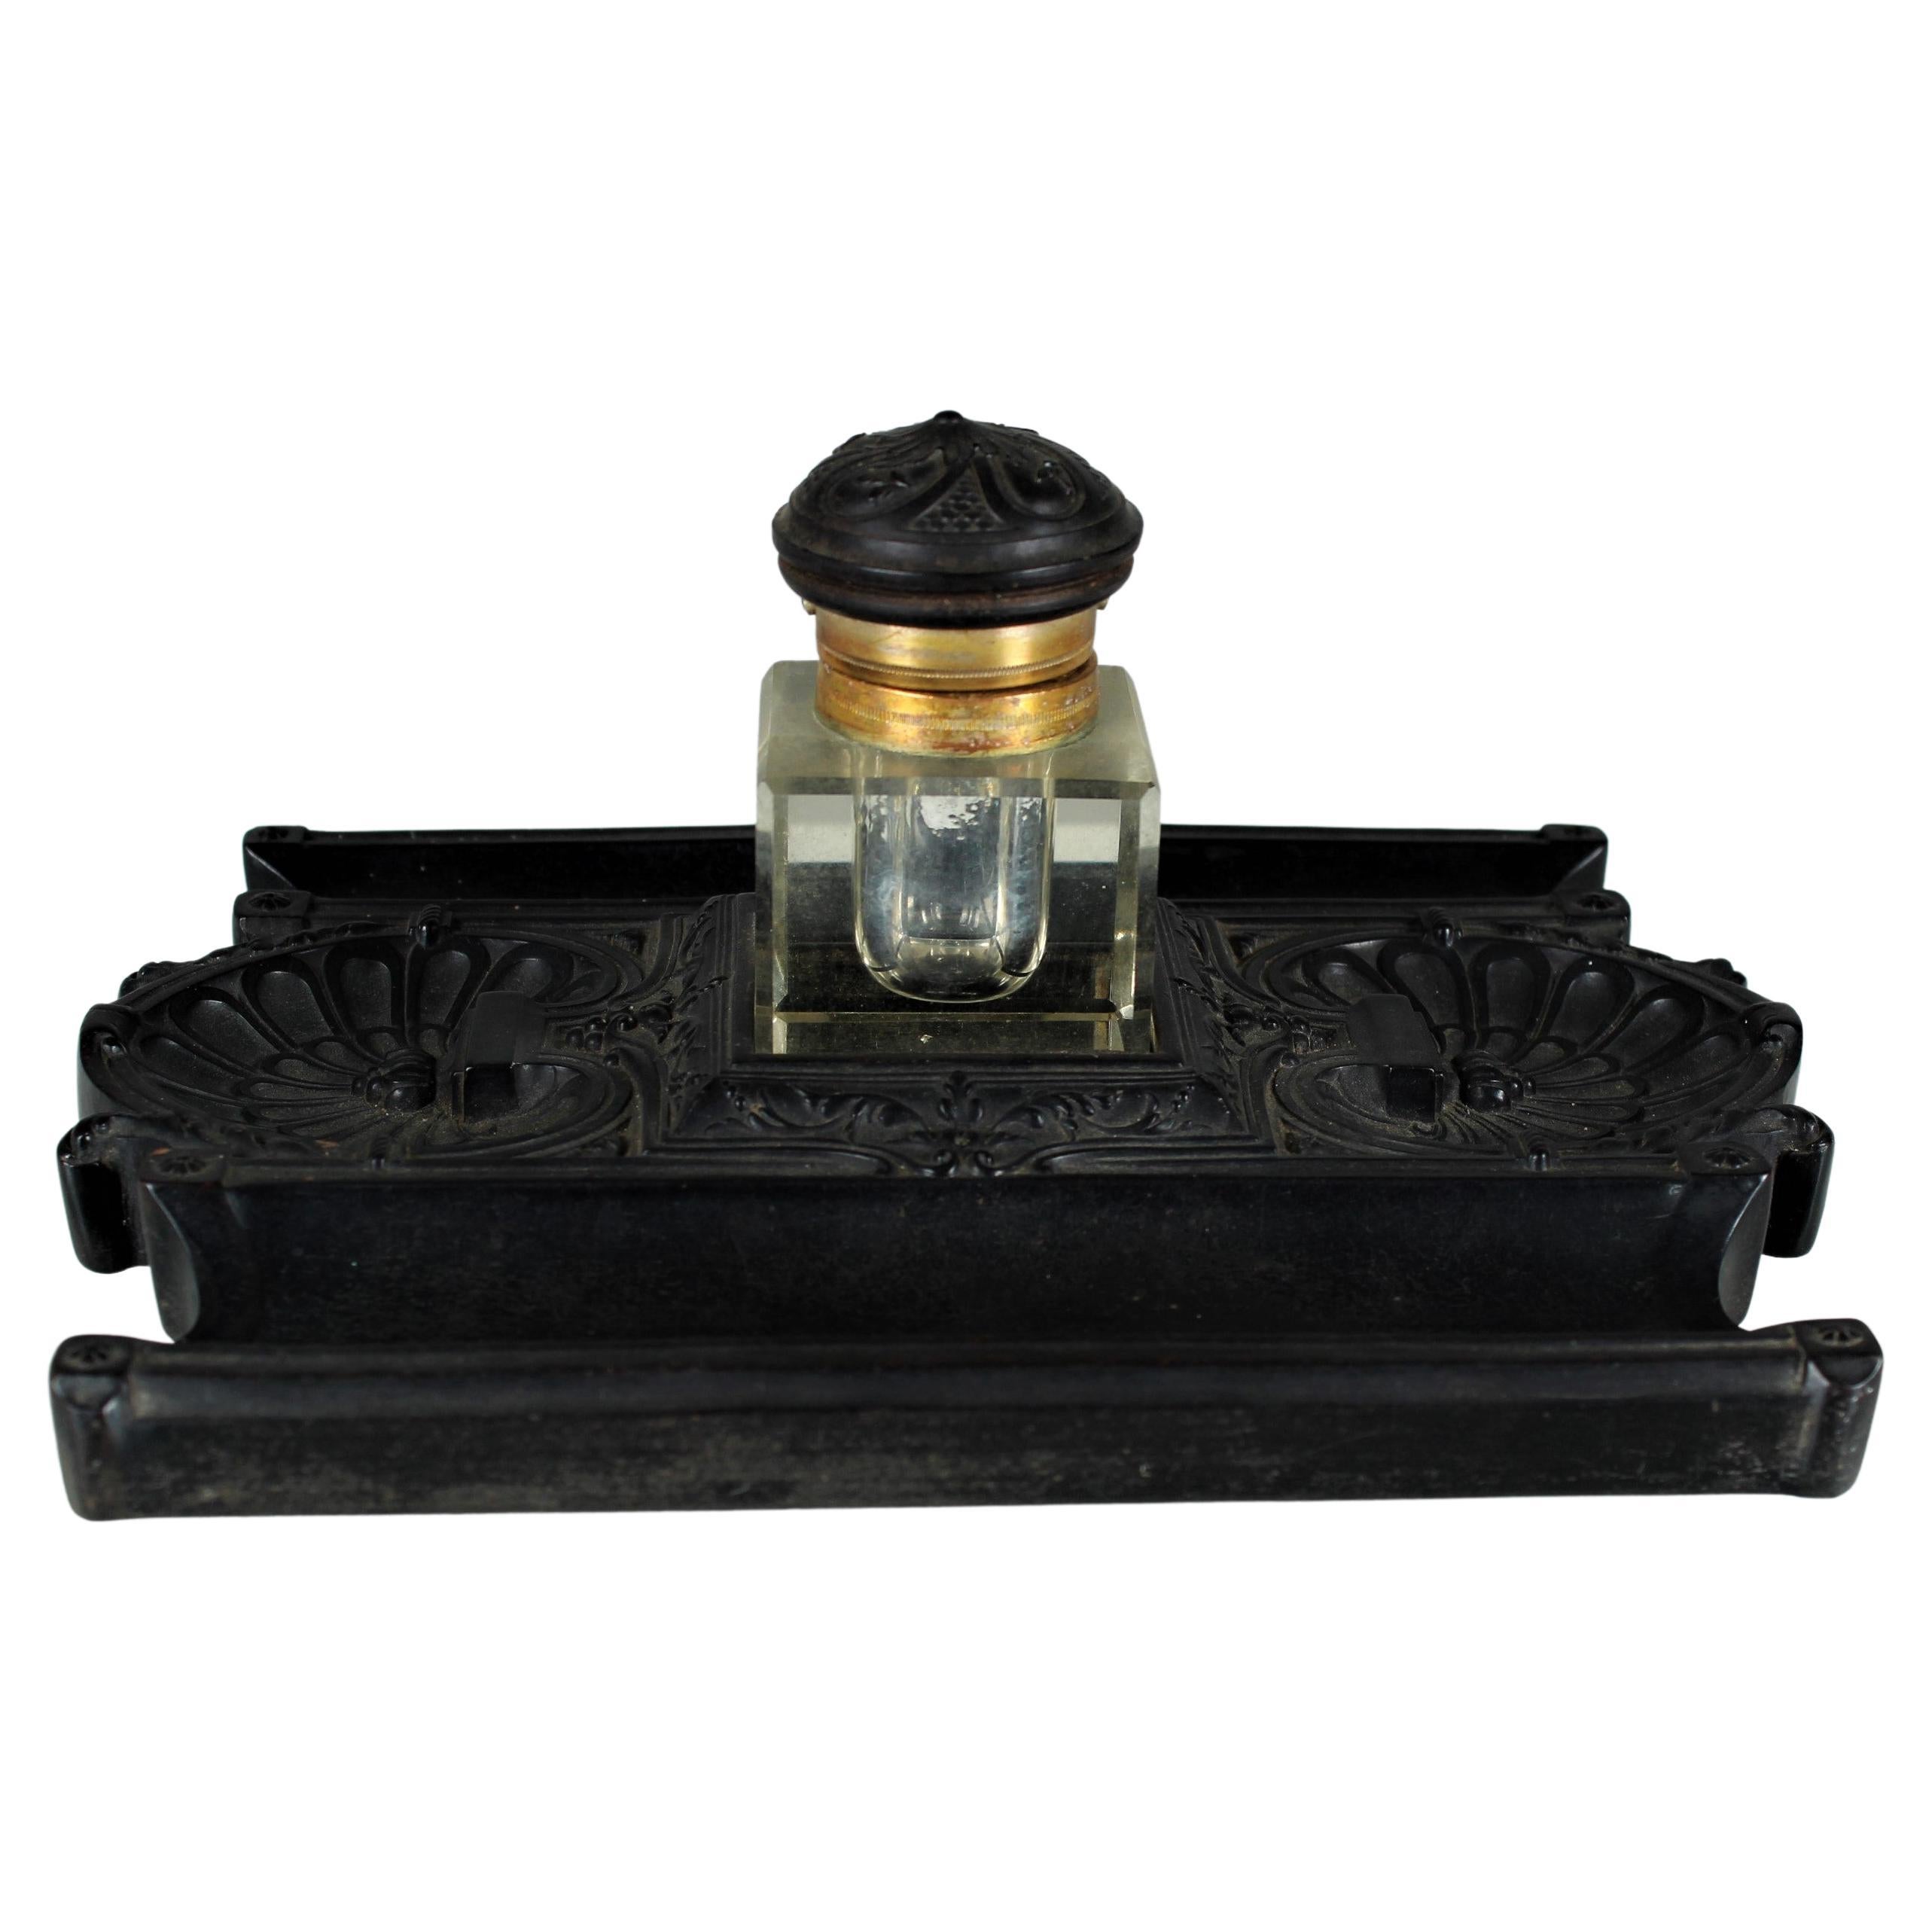 Antique Gutta-Percha Inkwell, Desk Pen Tray With Glass Insert, Circa 1880s For Sale